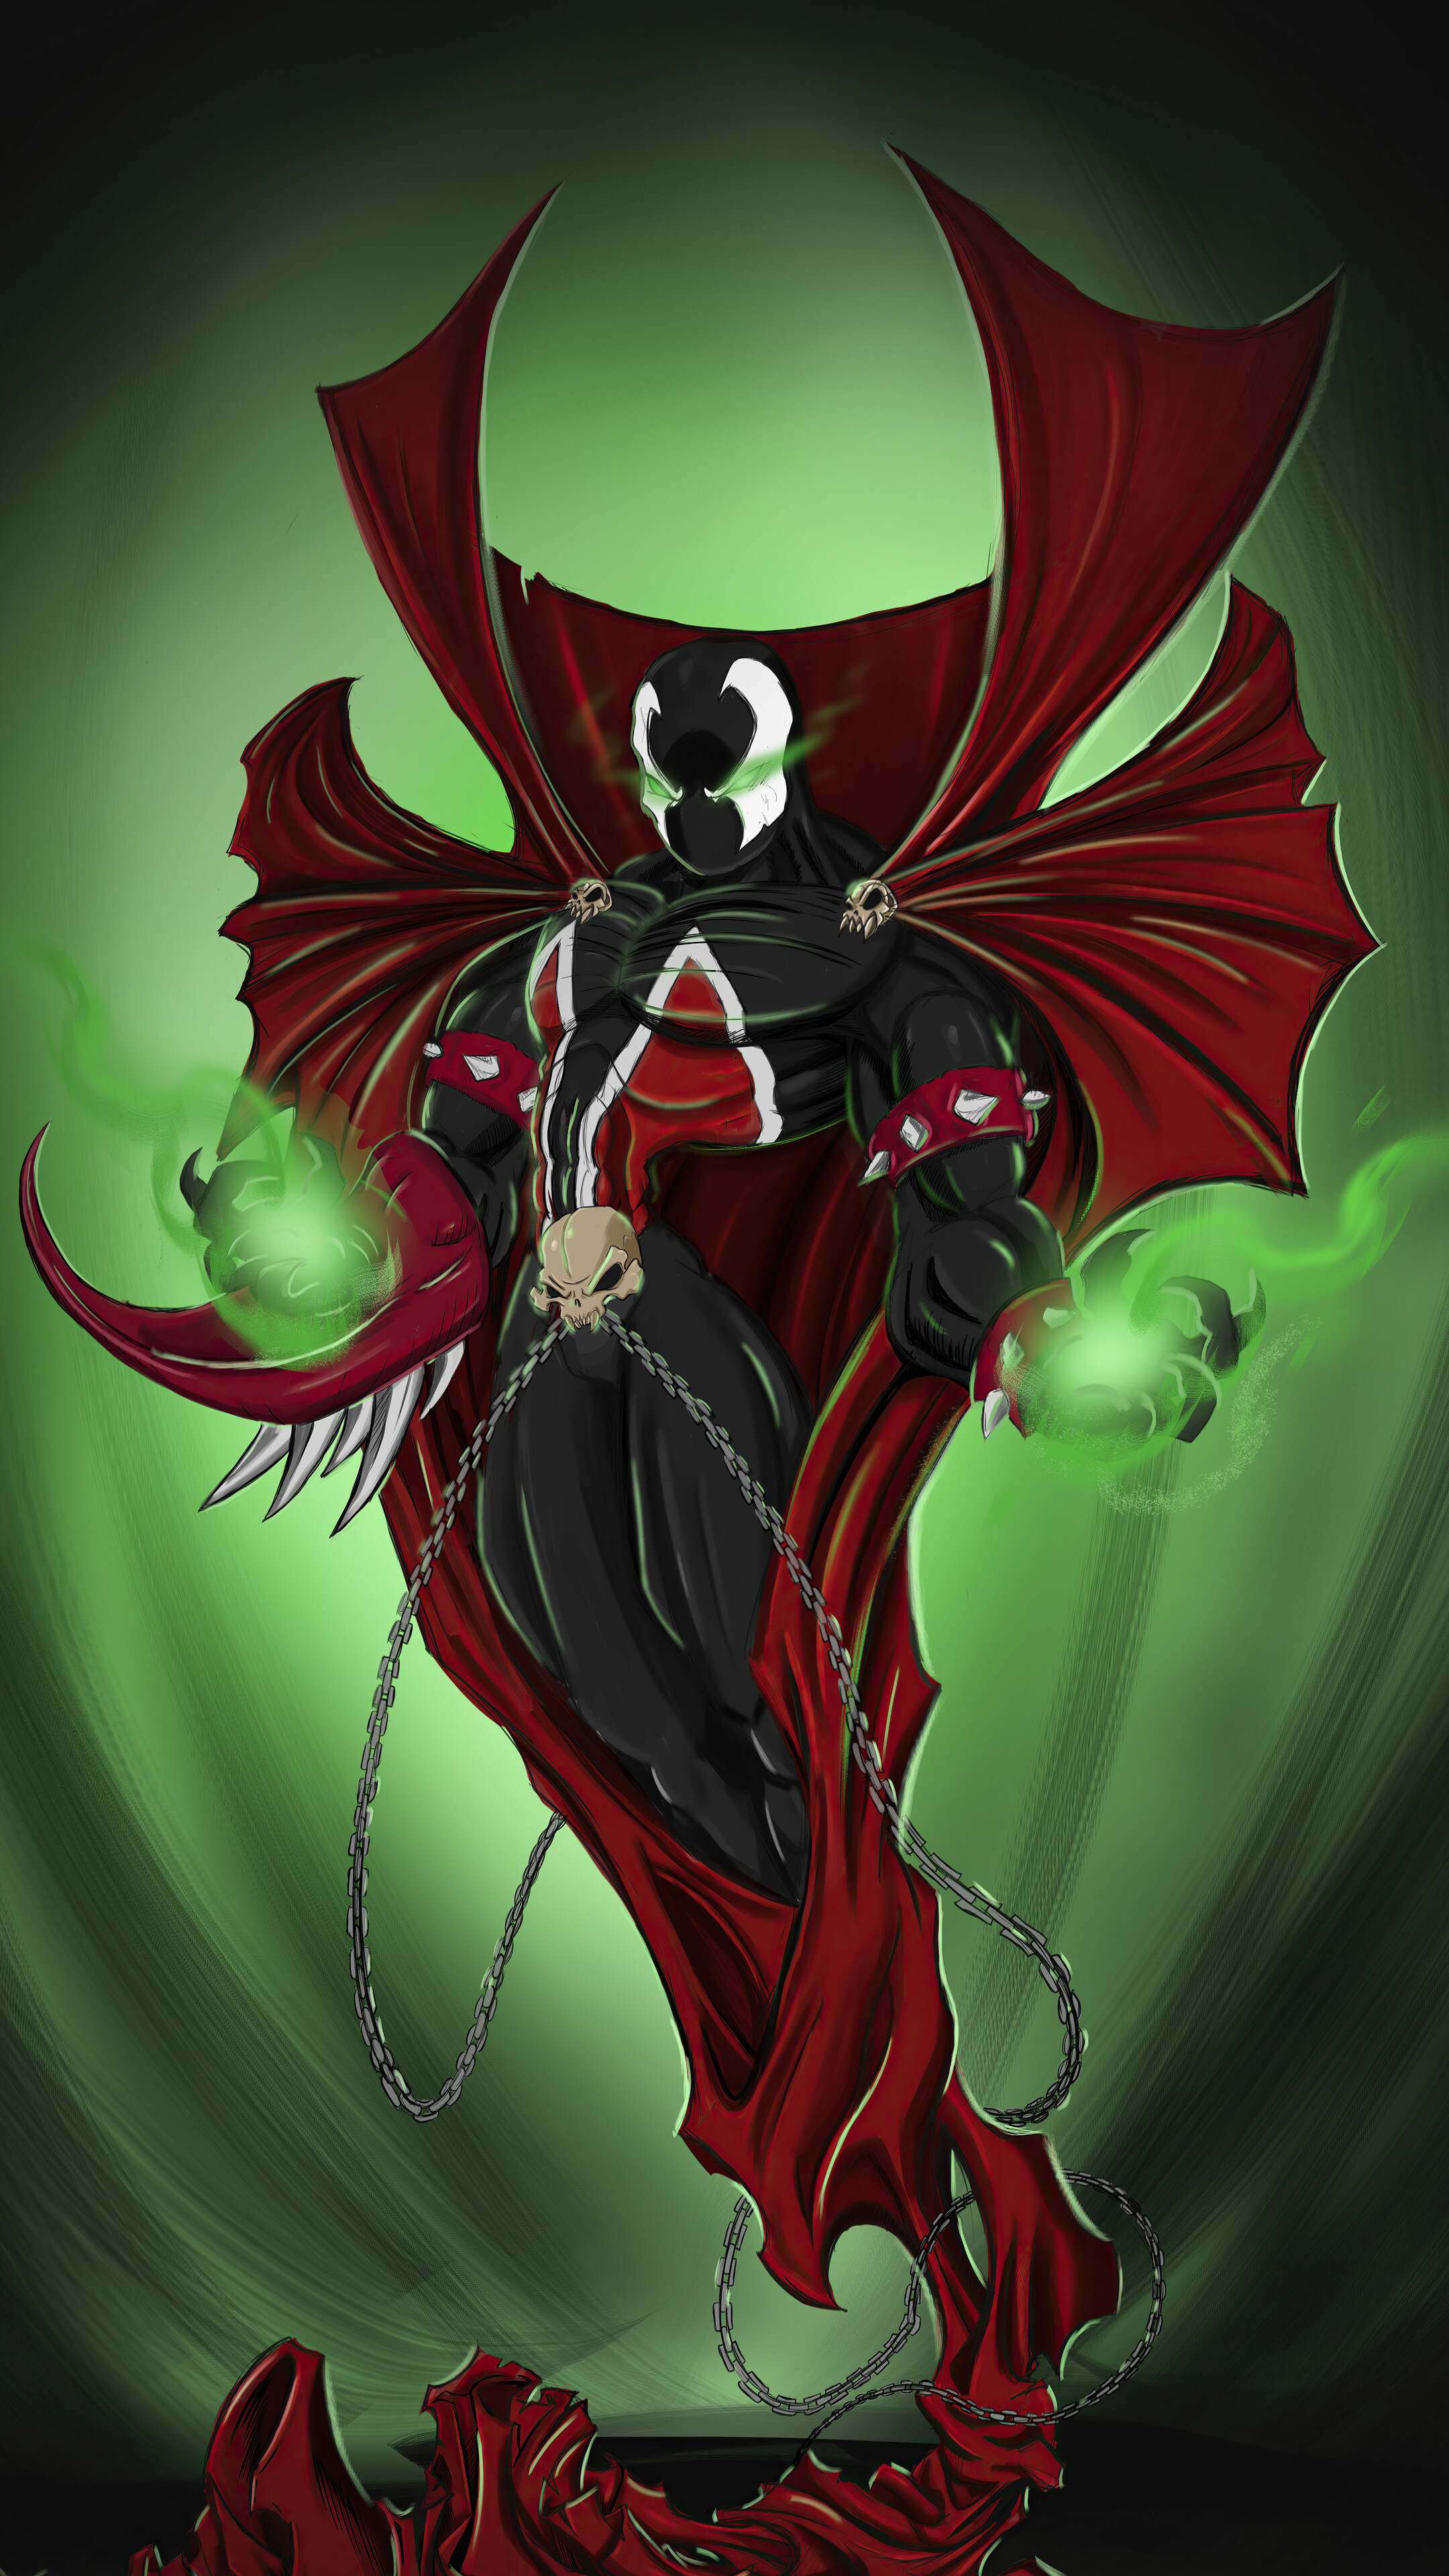 Hellspawn: A superhero/antihero appearing in a comic book of the same name published by American company Image Comics. 2160x3840 4K Wallpaper.